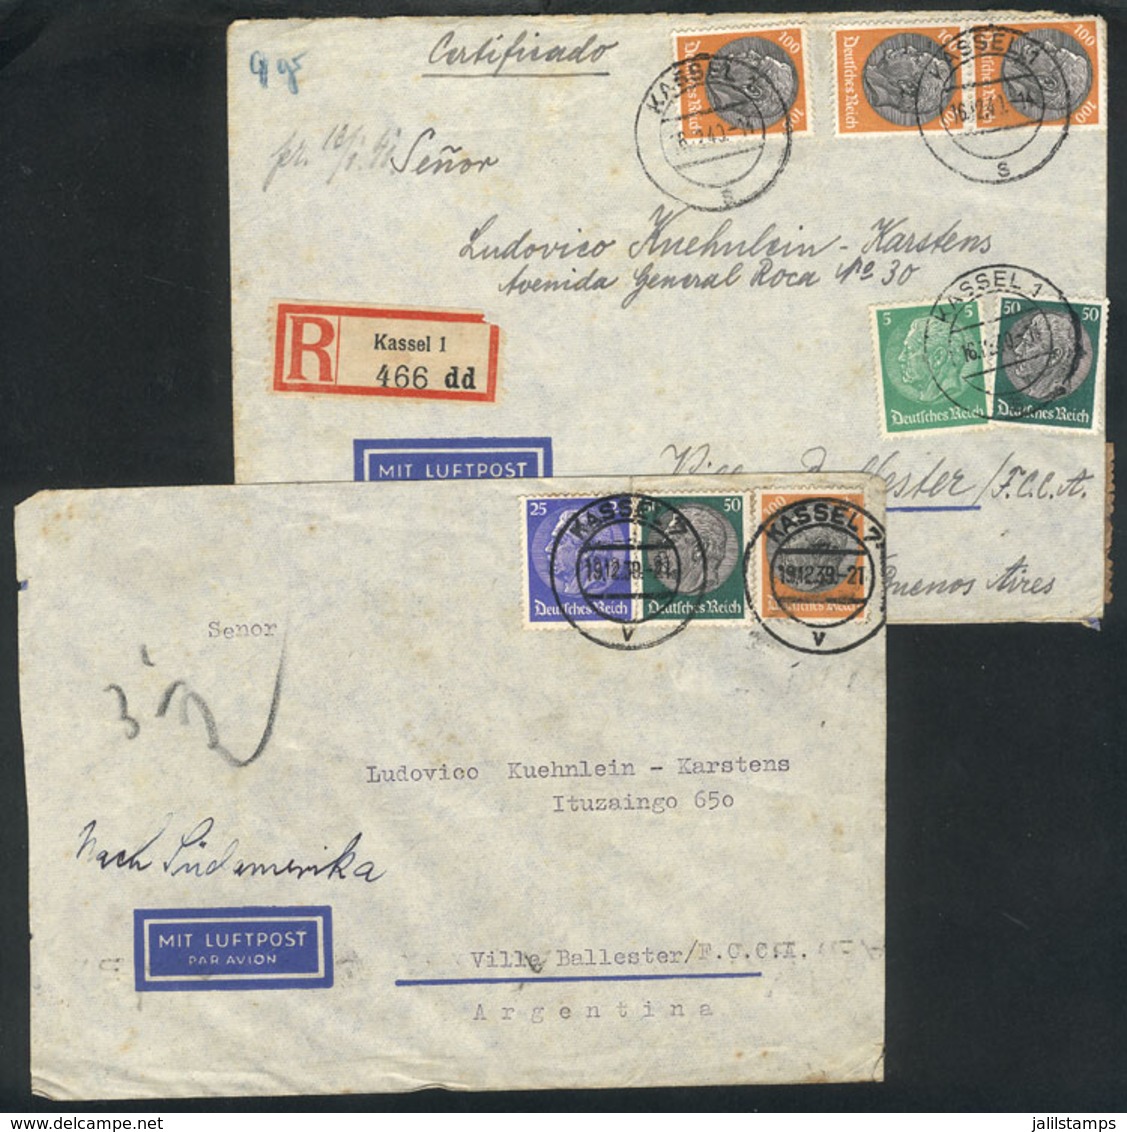 GERMANY: 2 Airmail Covers Sent From Kassel To Argentina In 1939/40, Interesting Nazi Censorship And Nice Postages! - Covers & Documents